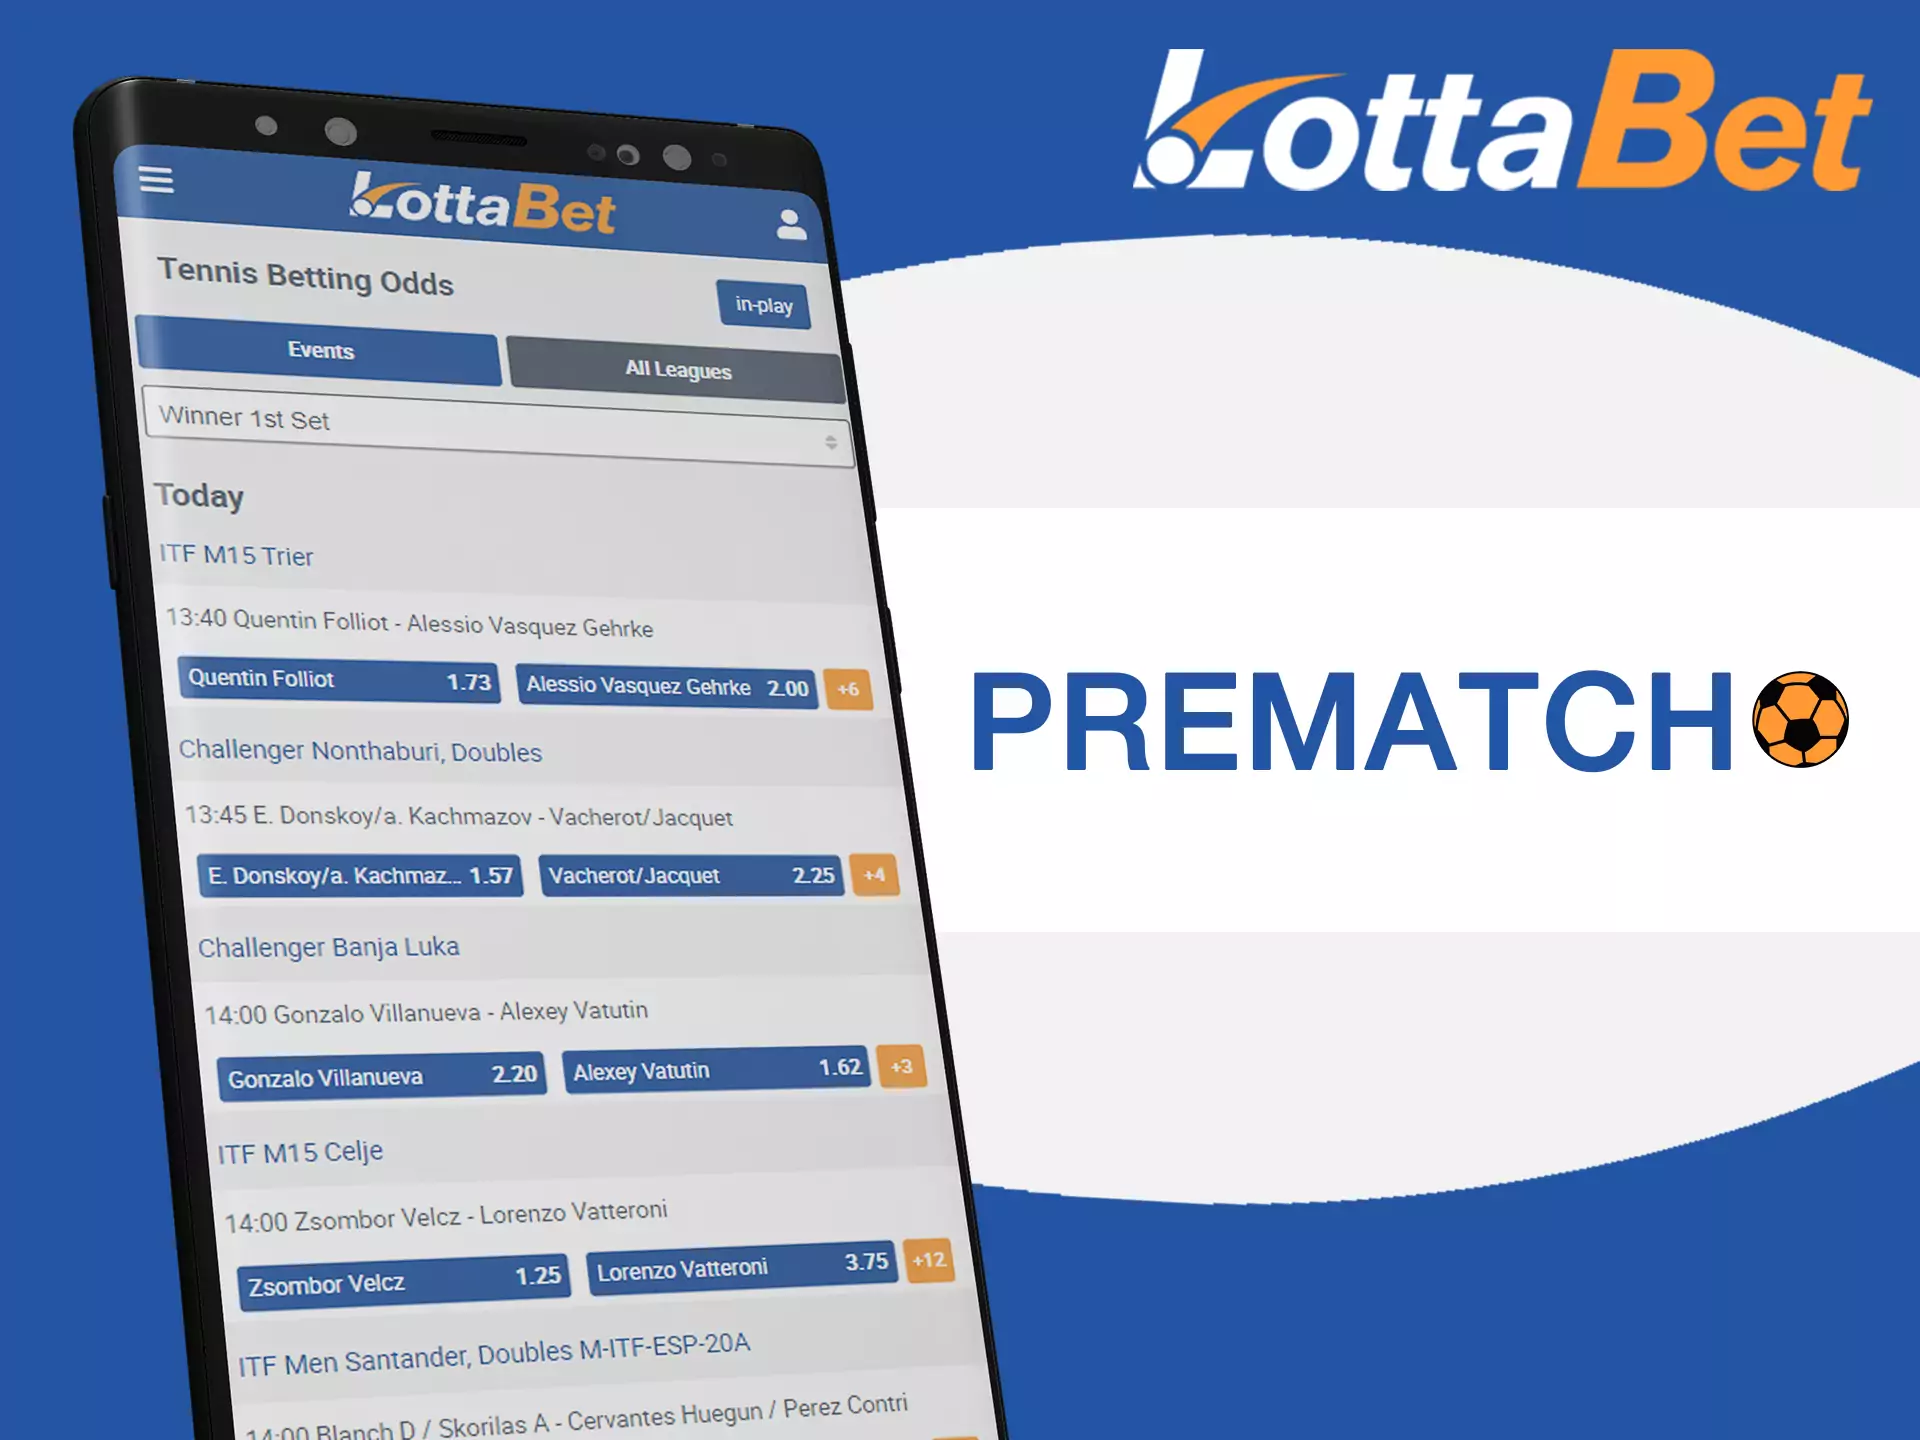 Bet on future matches in LottaBet app.